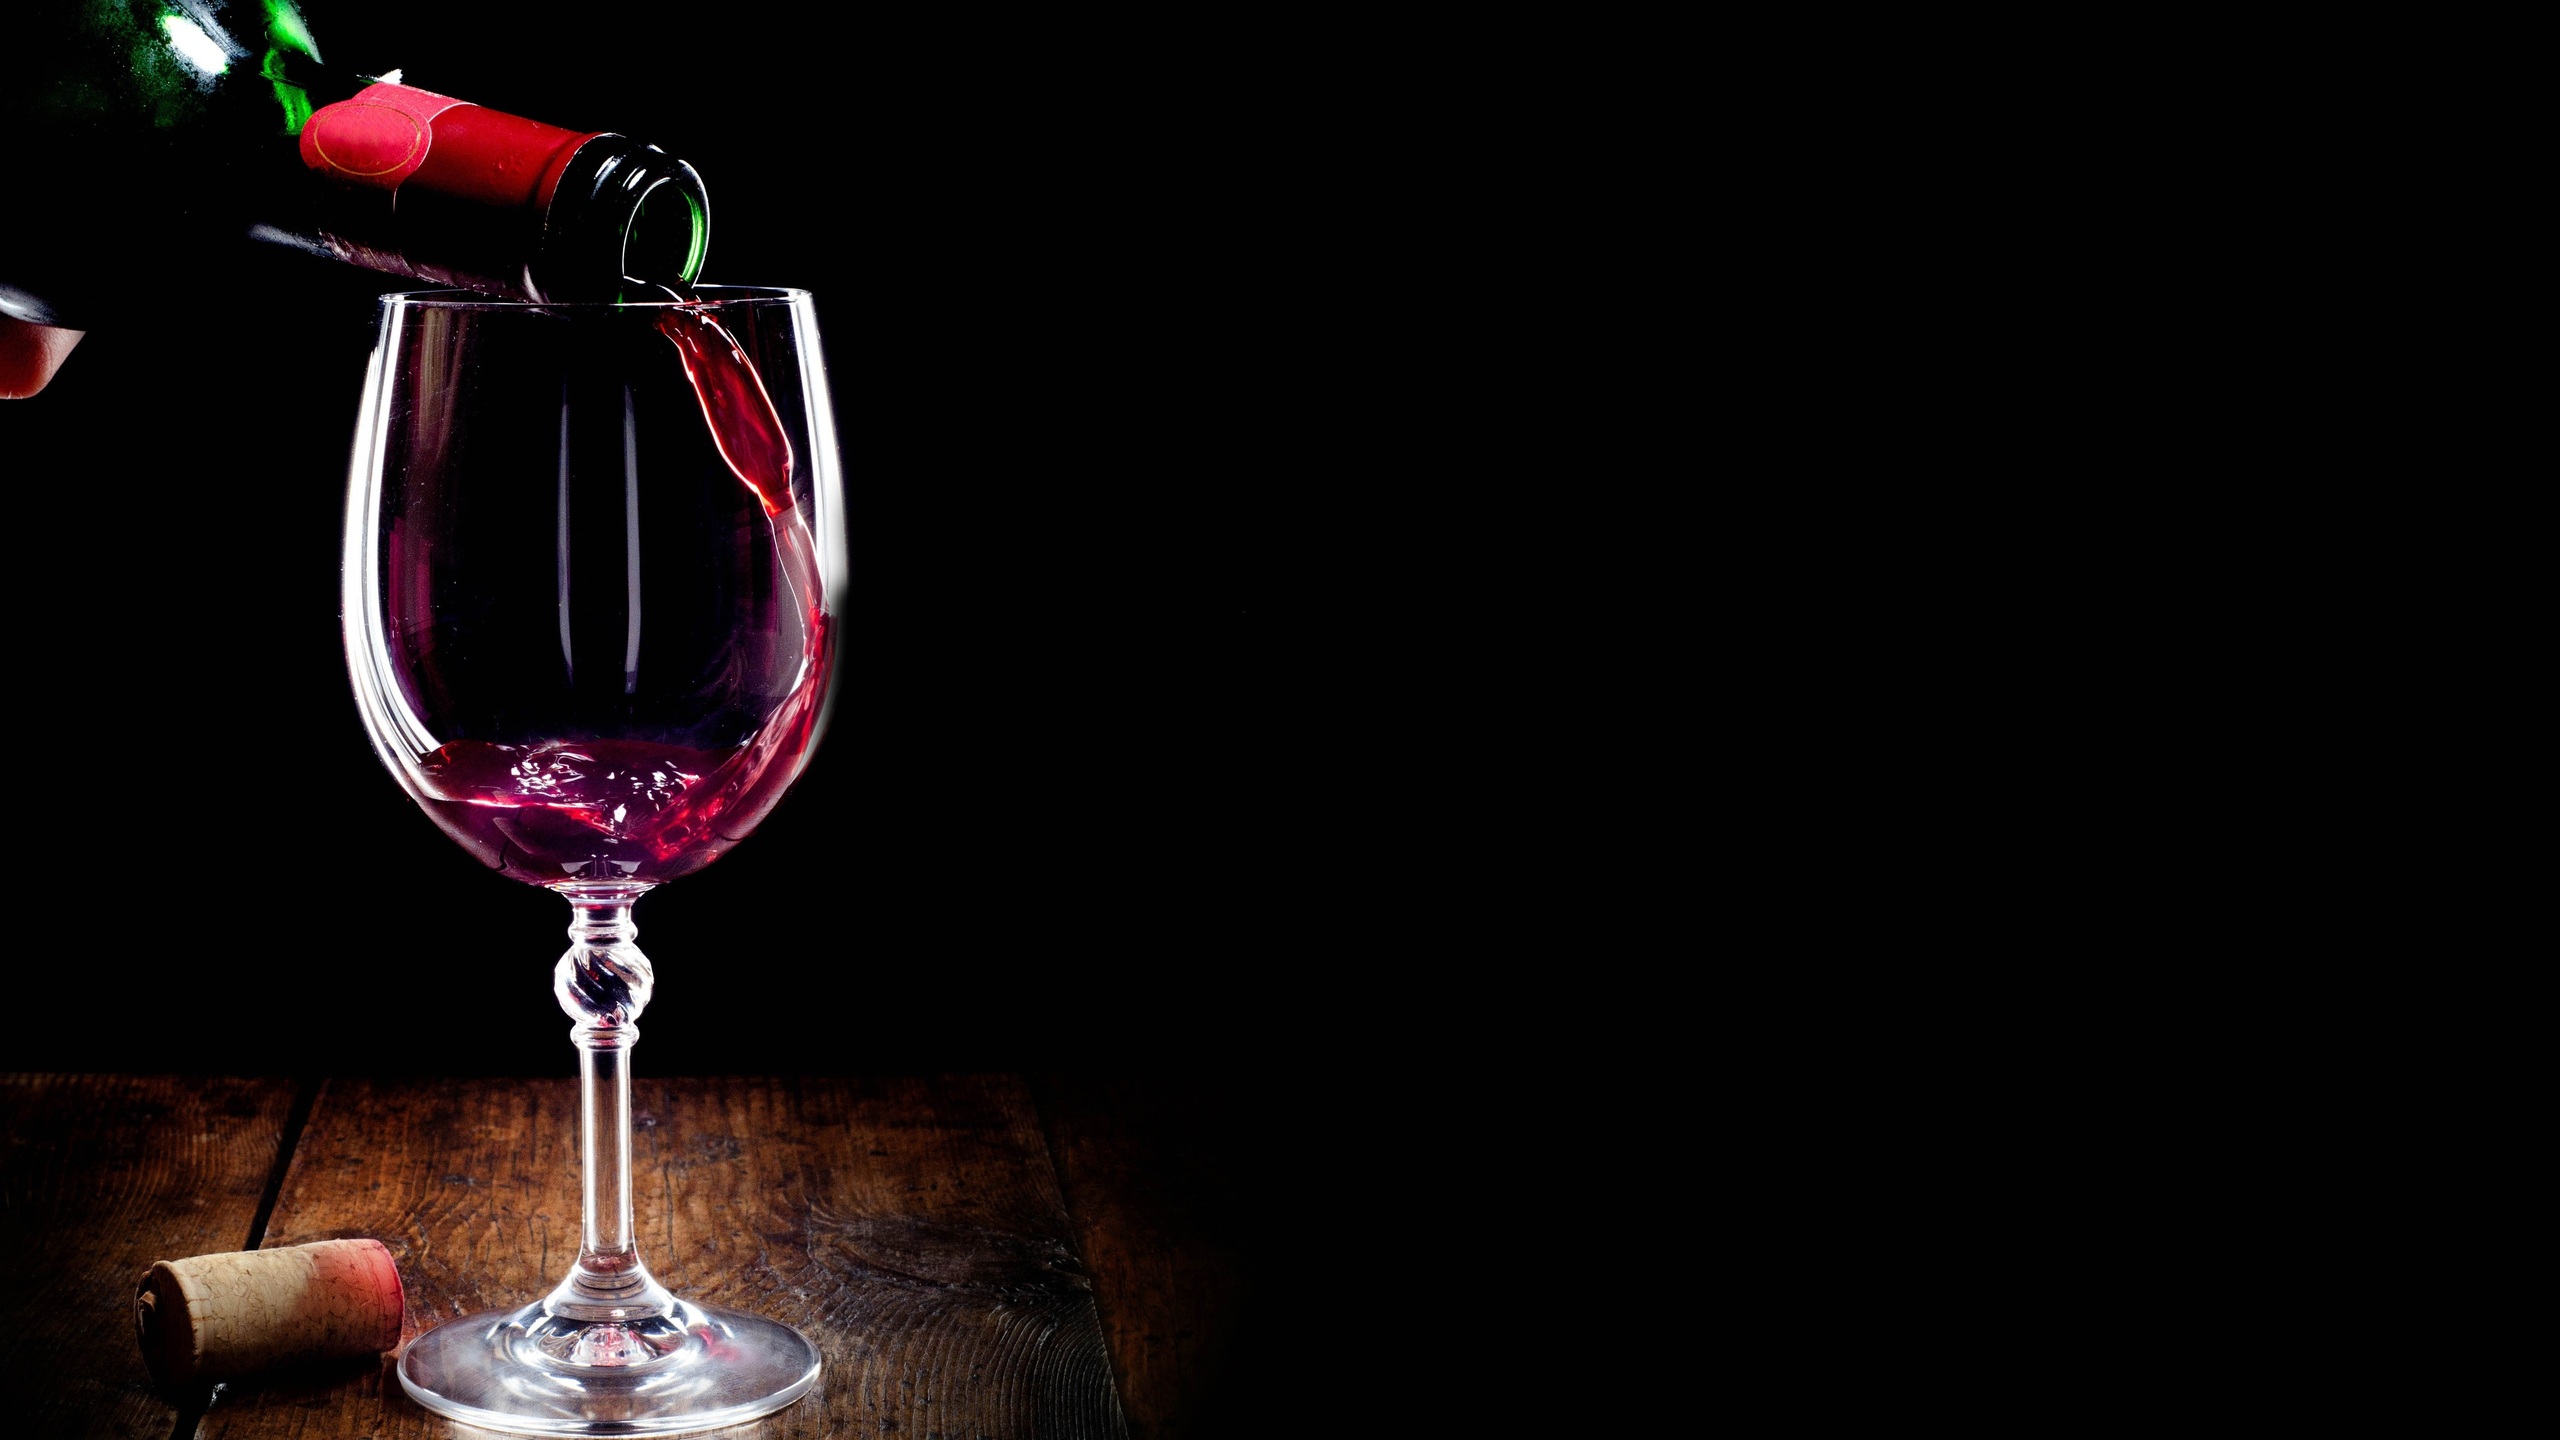 Wine, Bottle, Red, Tube, Glass, Black Background Photo - Black Background With Wine - HD Wallpaper 